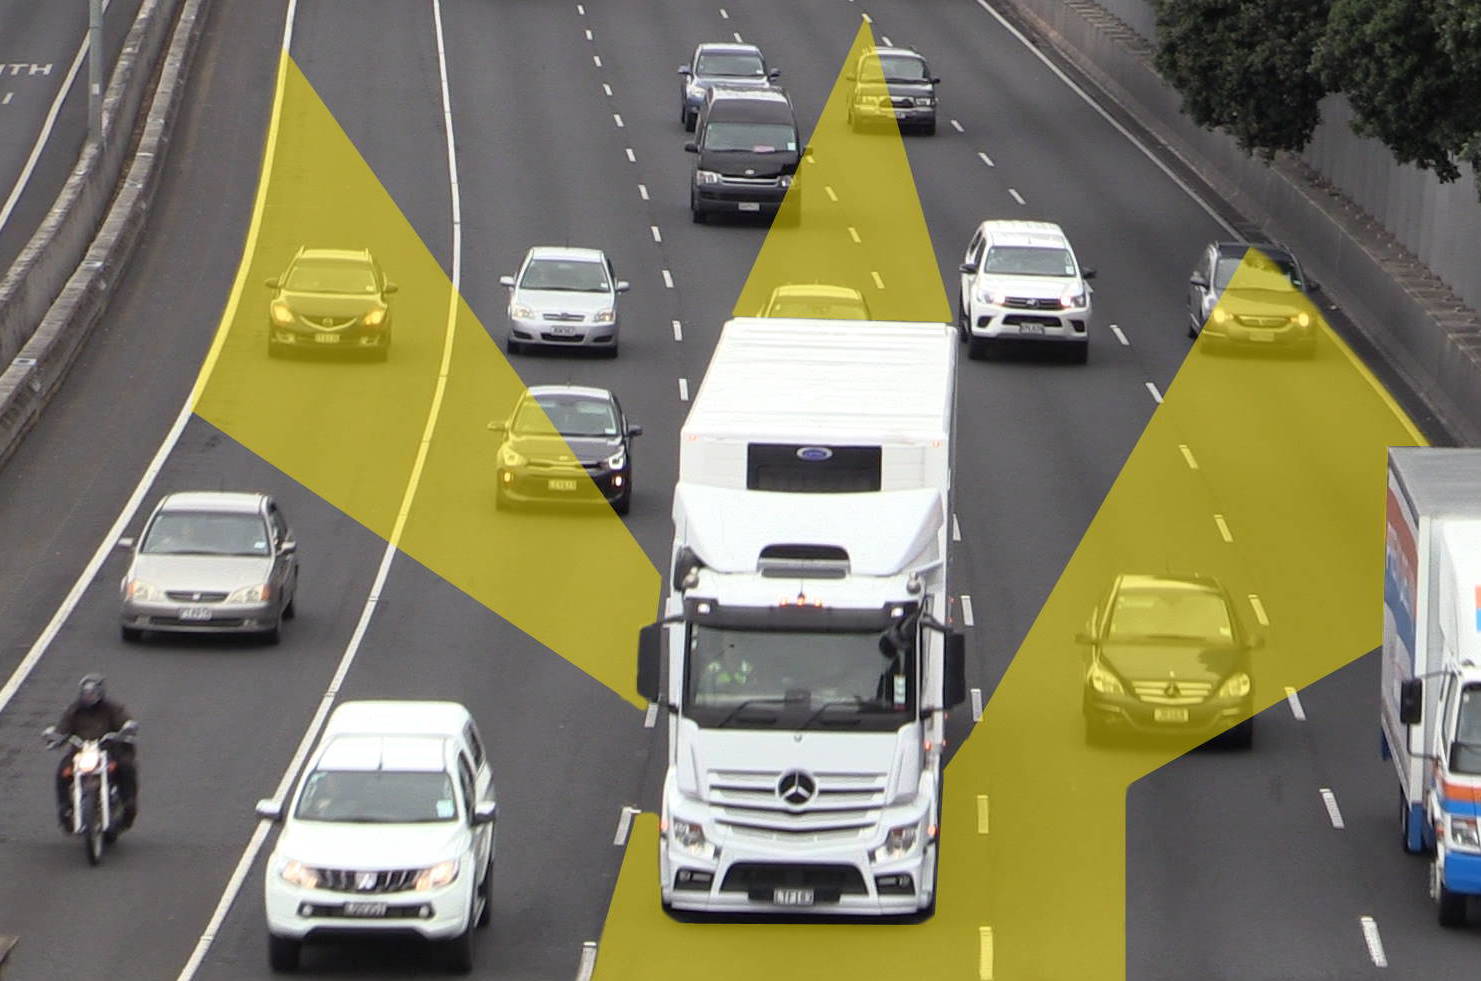 Do you have to check your blind spots while driving?